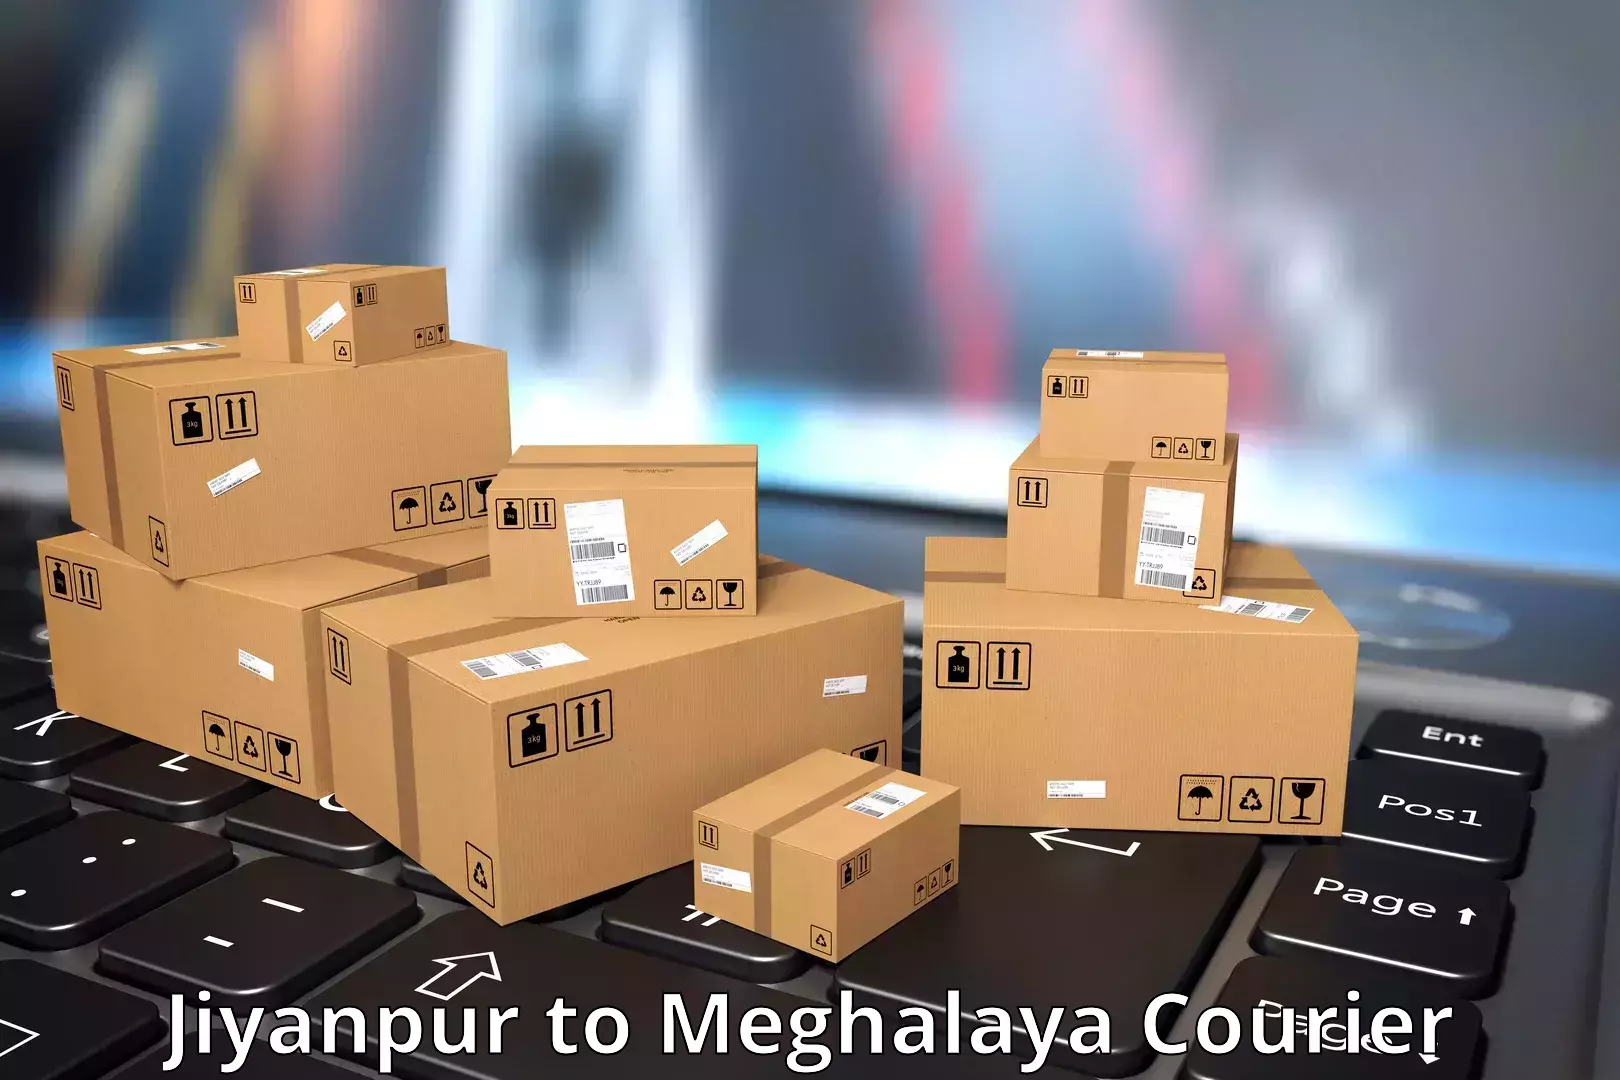 Flexible delivery schedules Jiyanpur to Meghalaya